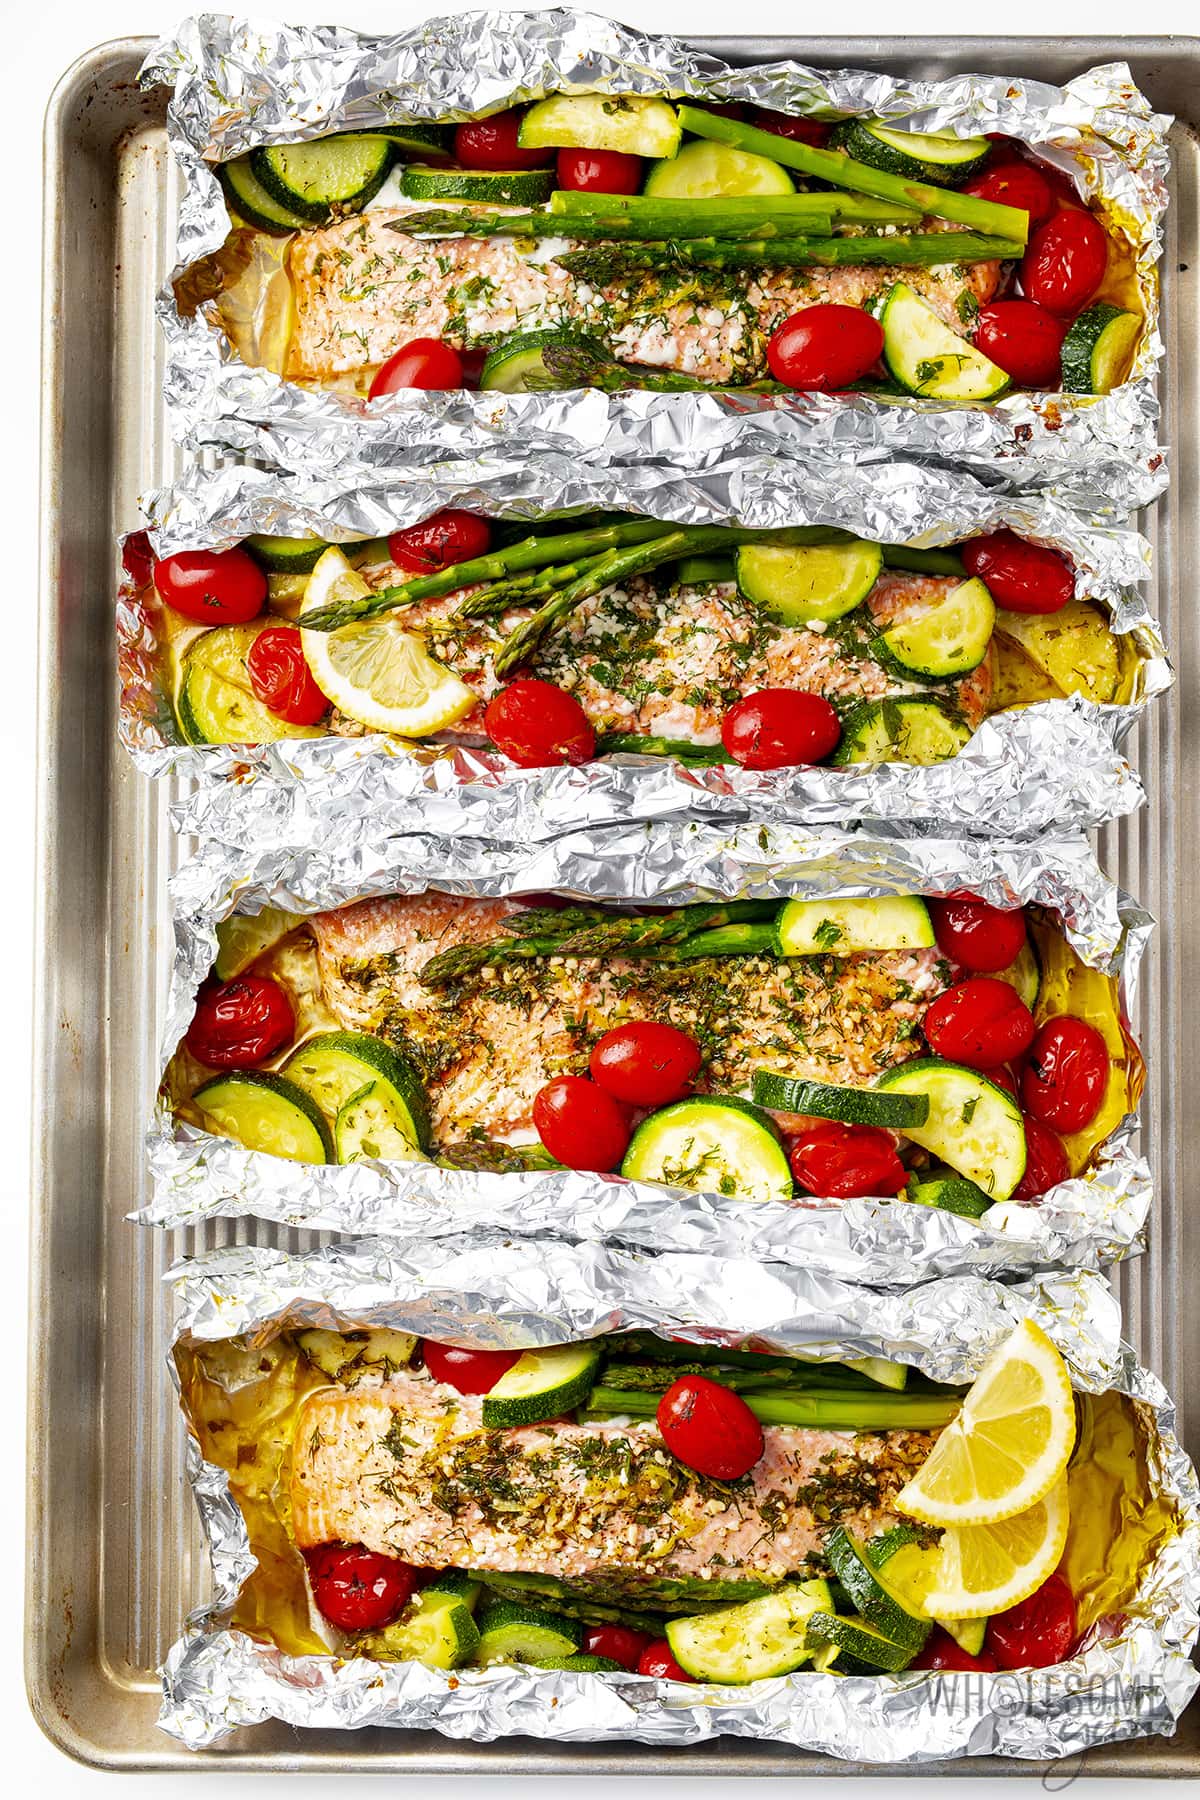 Baked salmon in foil with veggies on a sheet pan.